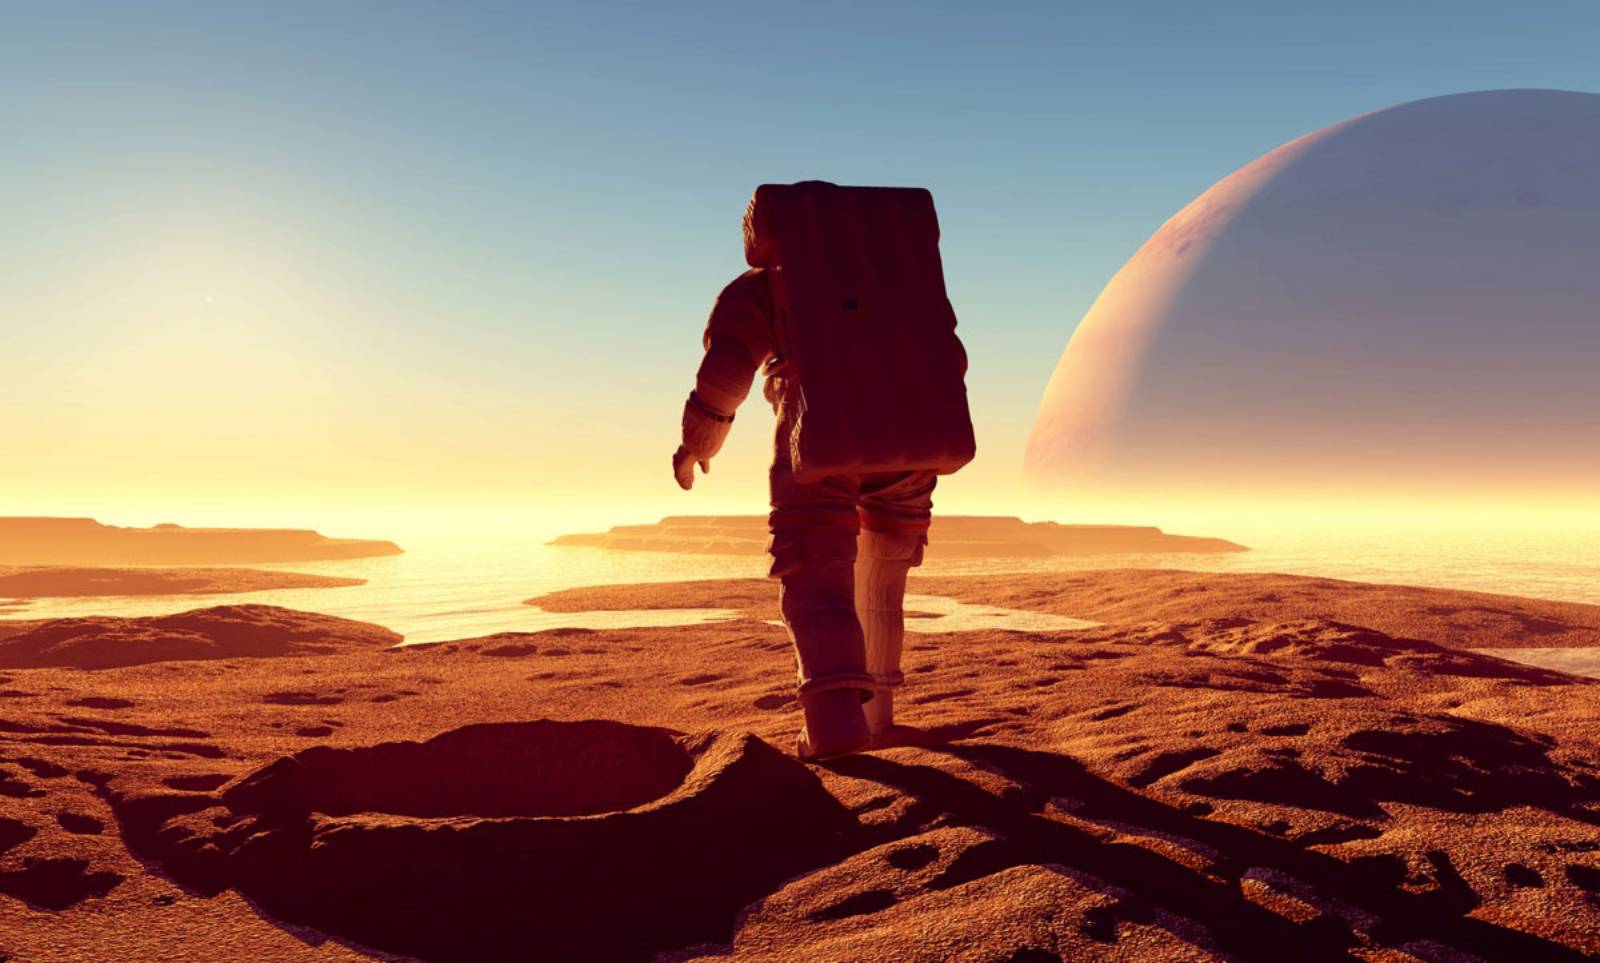 Planet Mars. NASA Astronauts Tell Us WHAT Life Will Be Like There